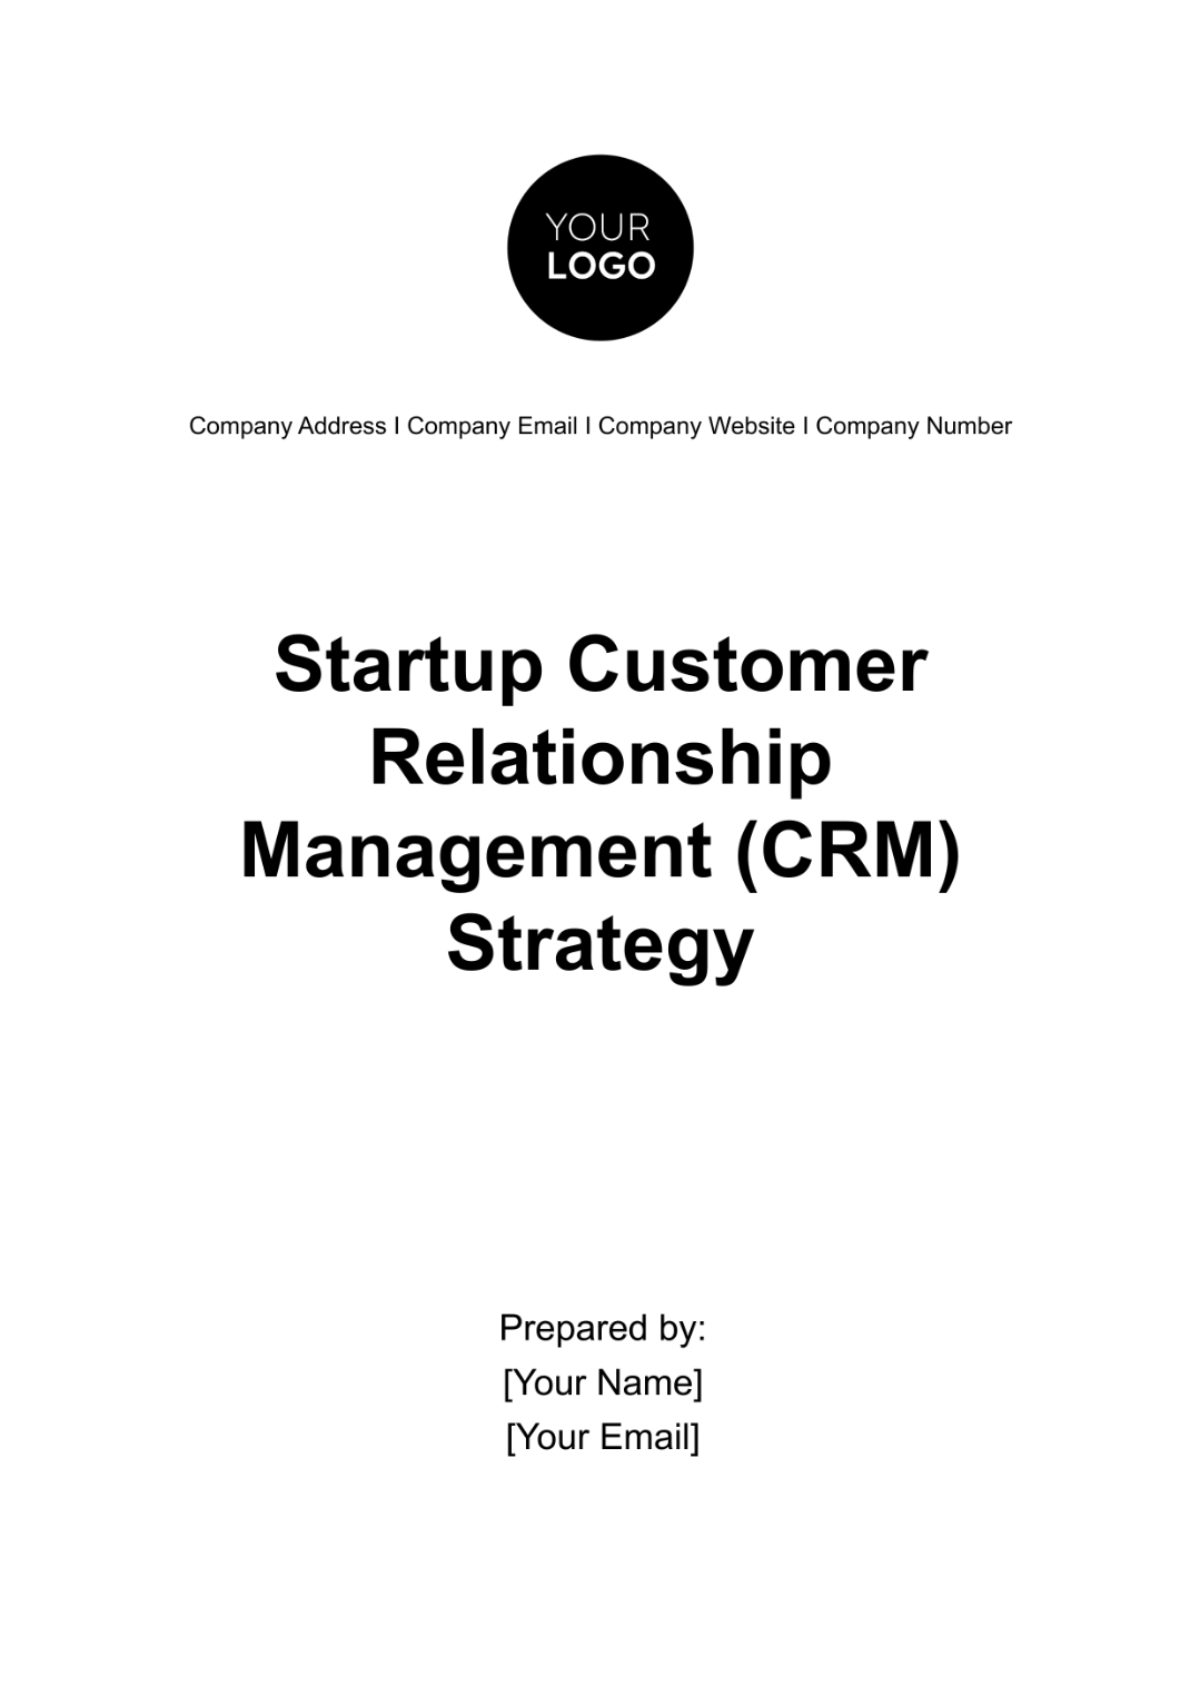 Startup Customer Relationship Management (CRM) Strategy Template